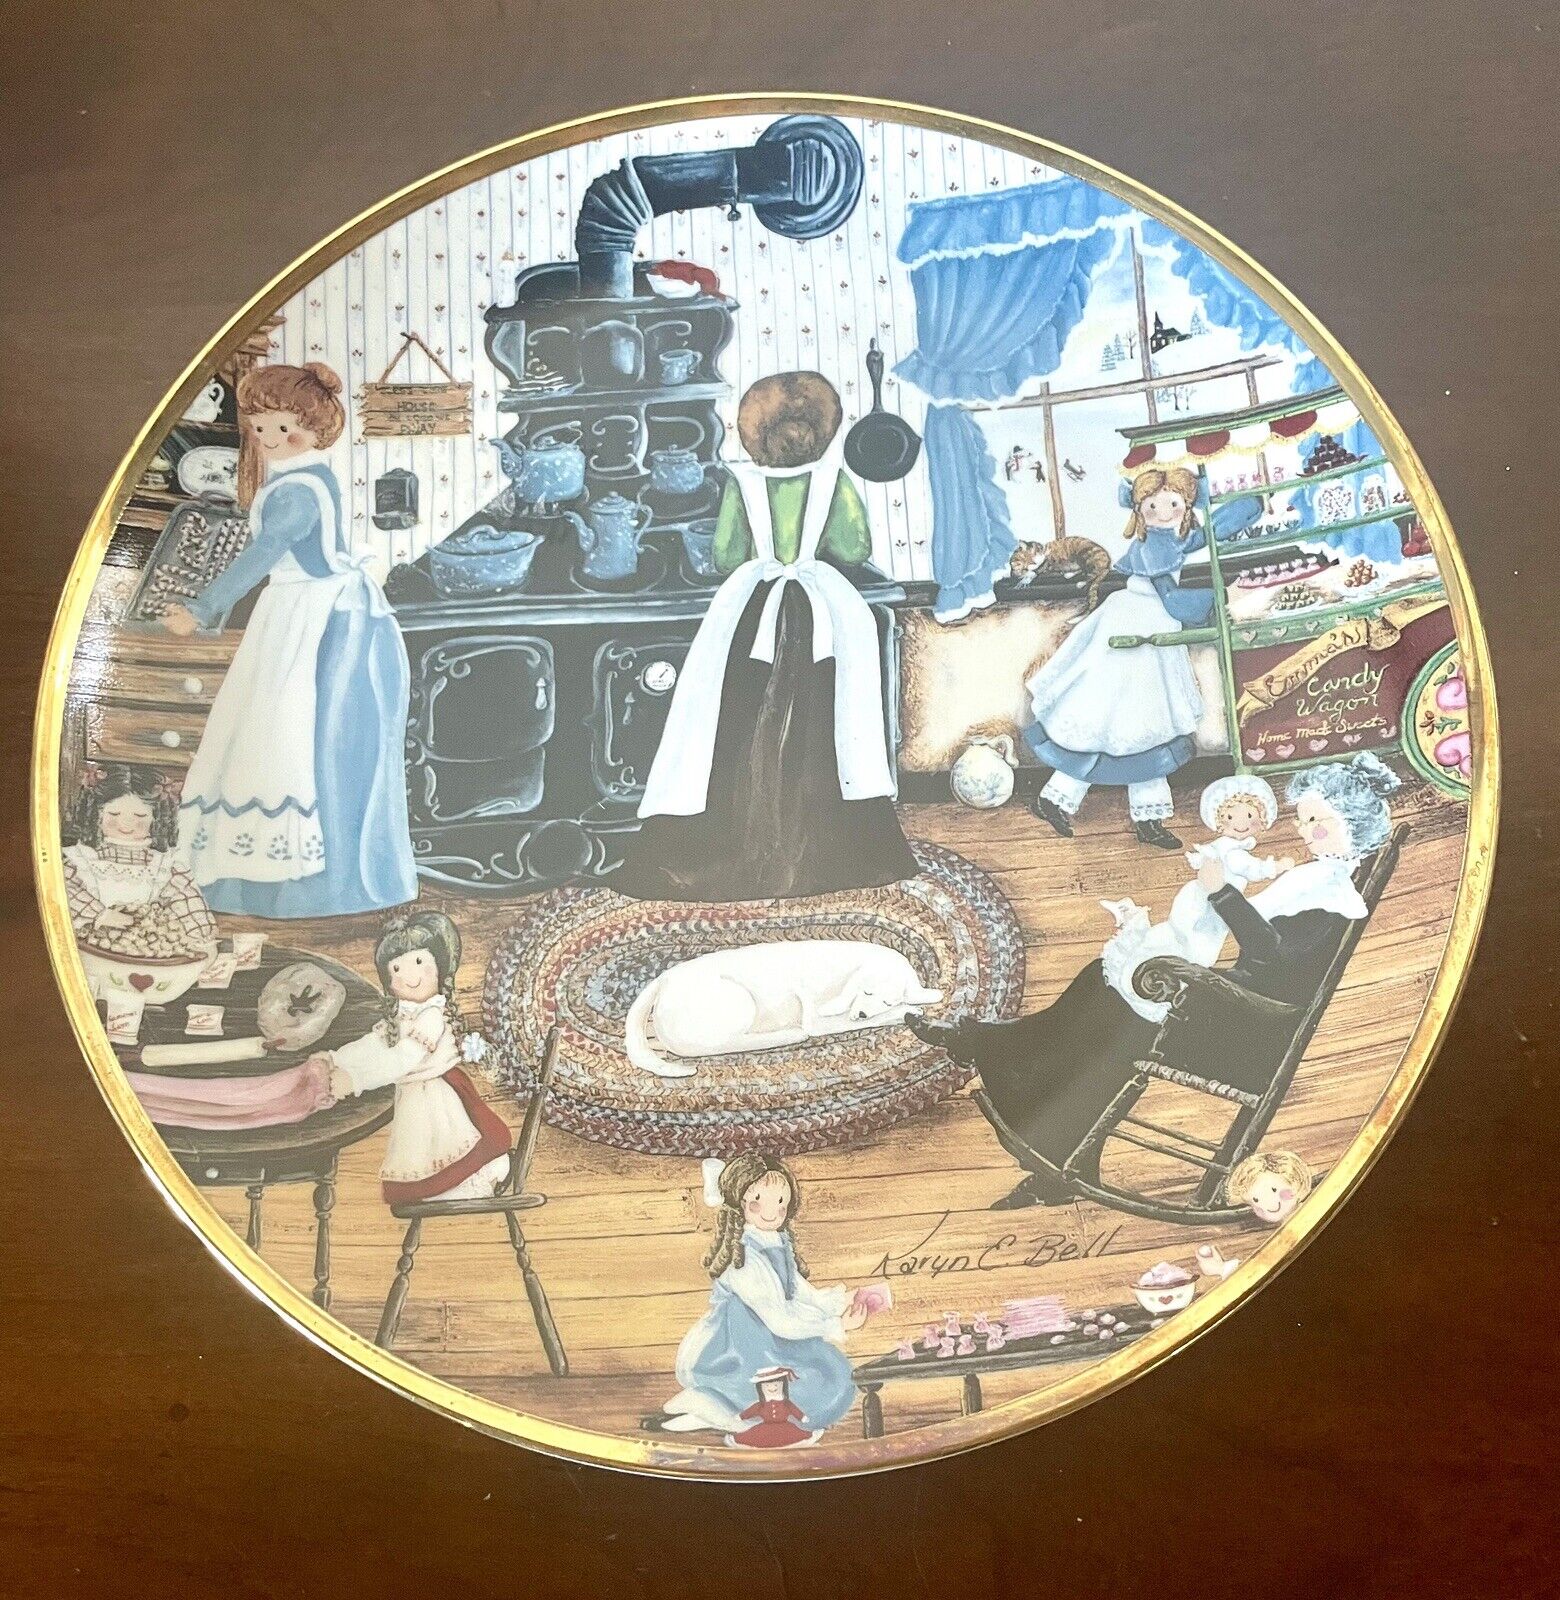 Franklin Mint Collectors Plate ~Homemade Sweets by Karyn E. Bell Limited #C2607